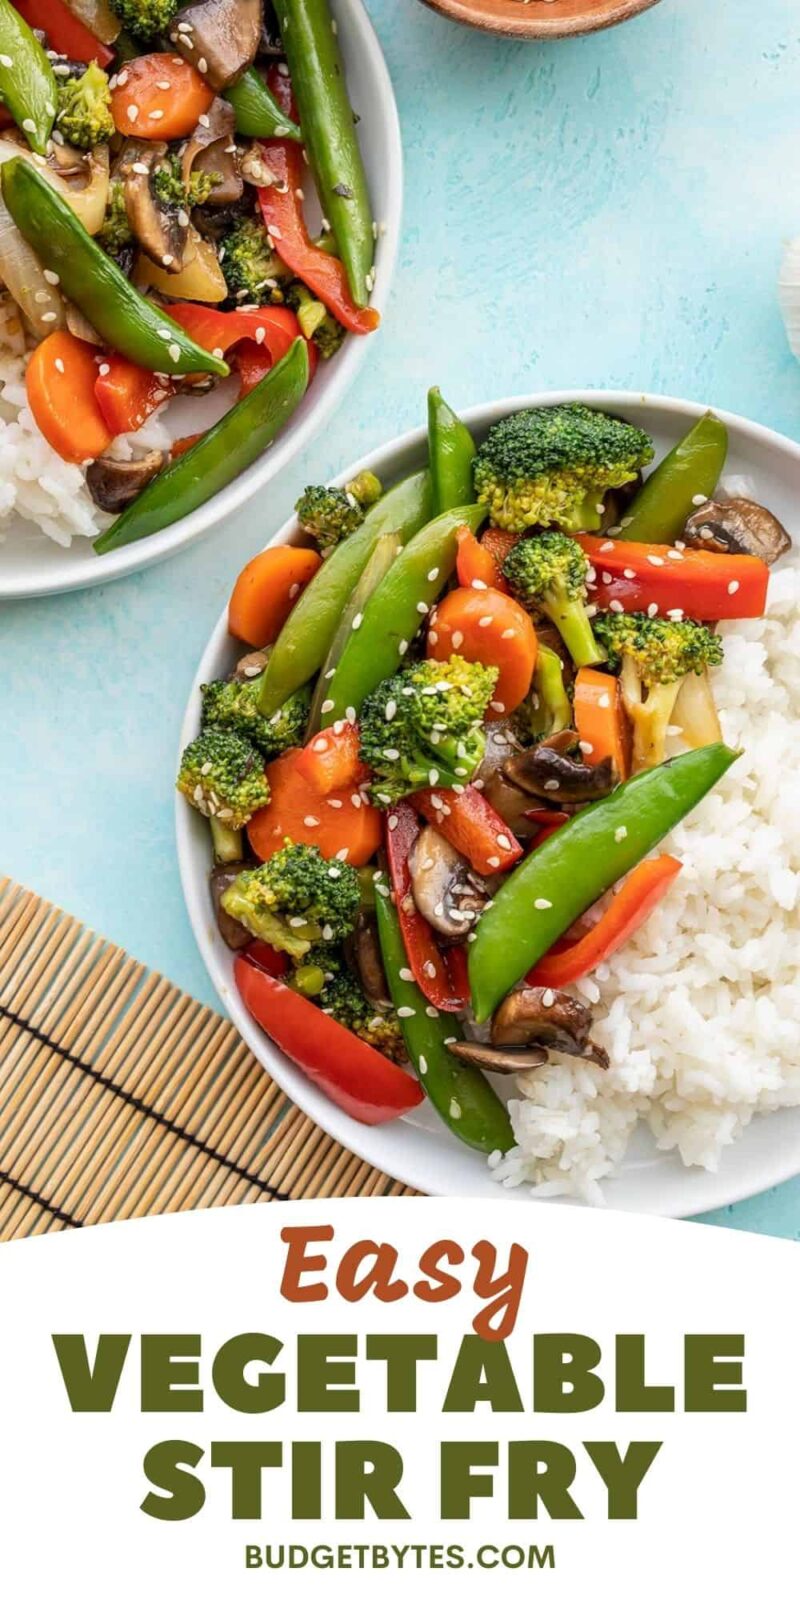 Learn More About The Fundamentals of Stir Fry